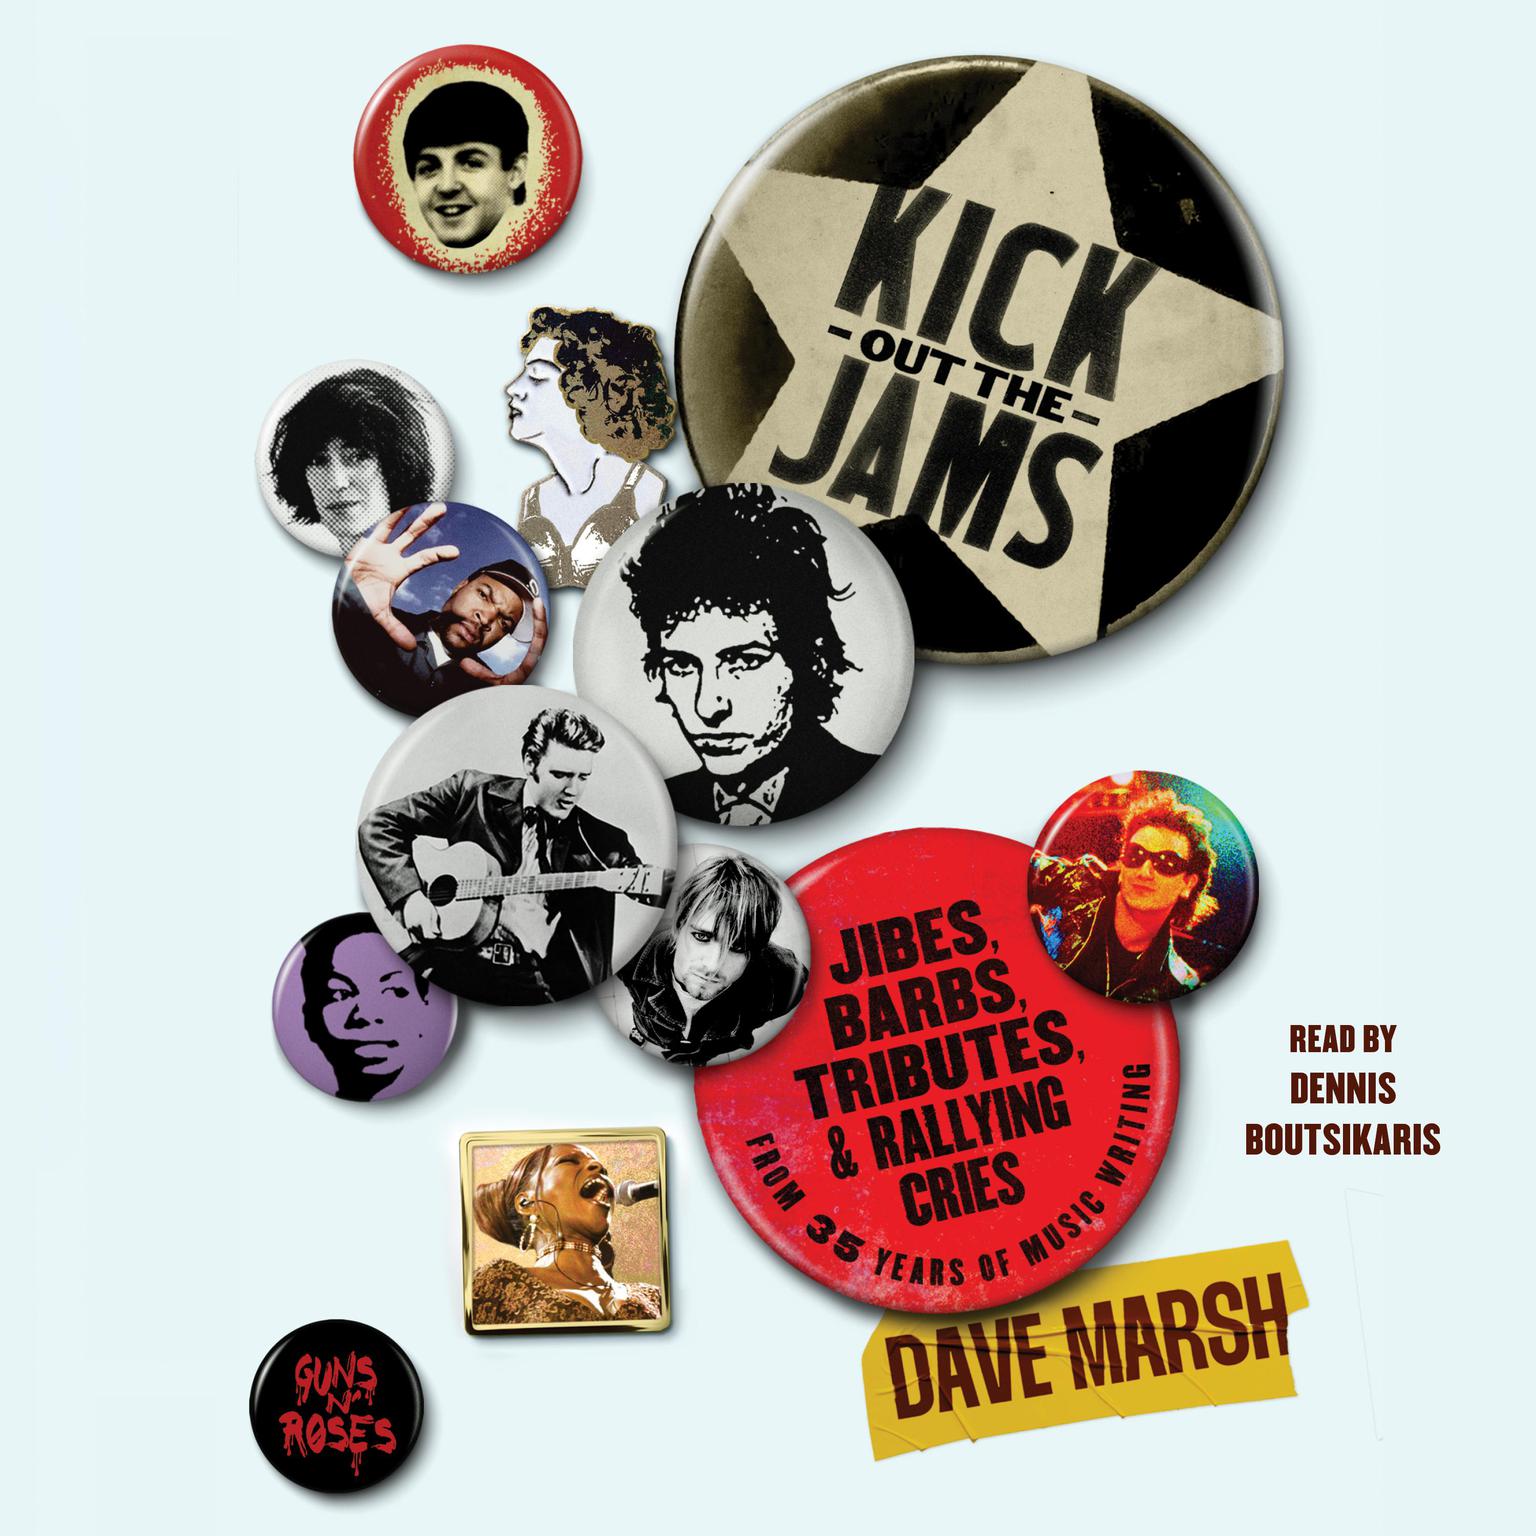 Kick Out the Jams: Jibes, Barbs, Tributes, and Rallying Cries from 25 Years of Music Writing Audiobook, by Dave Marsh